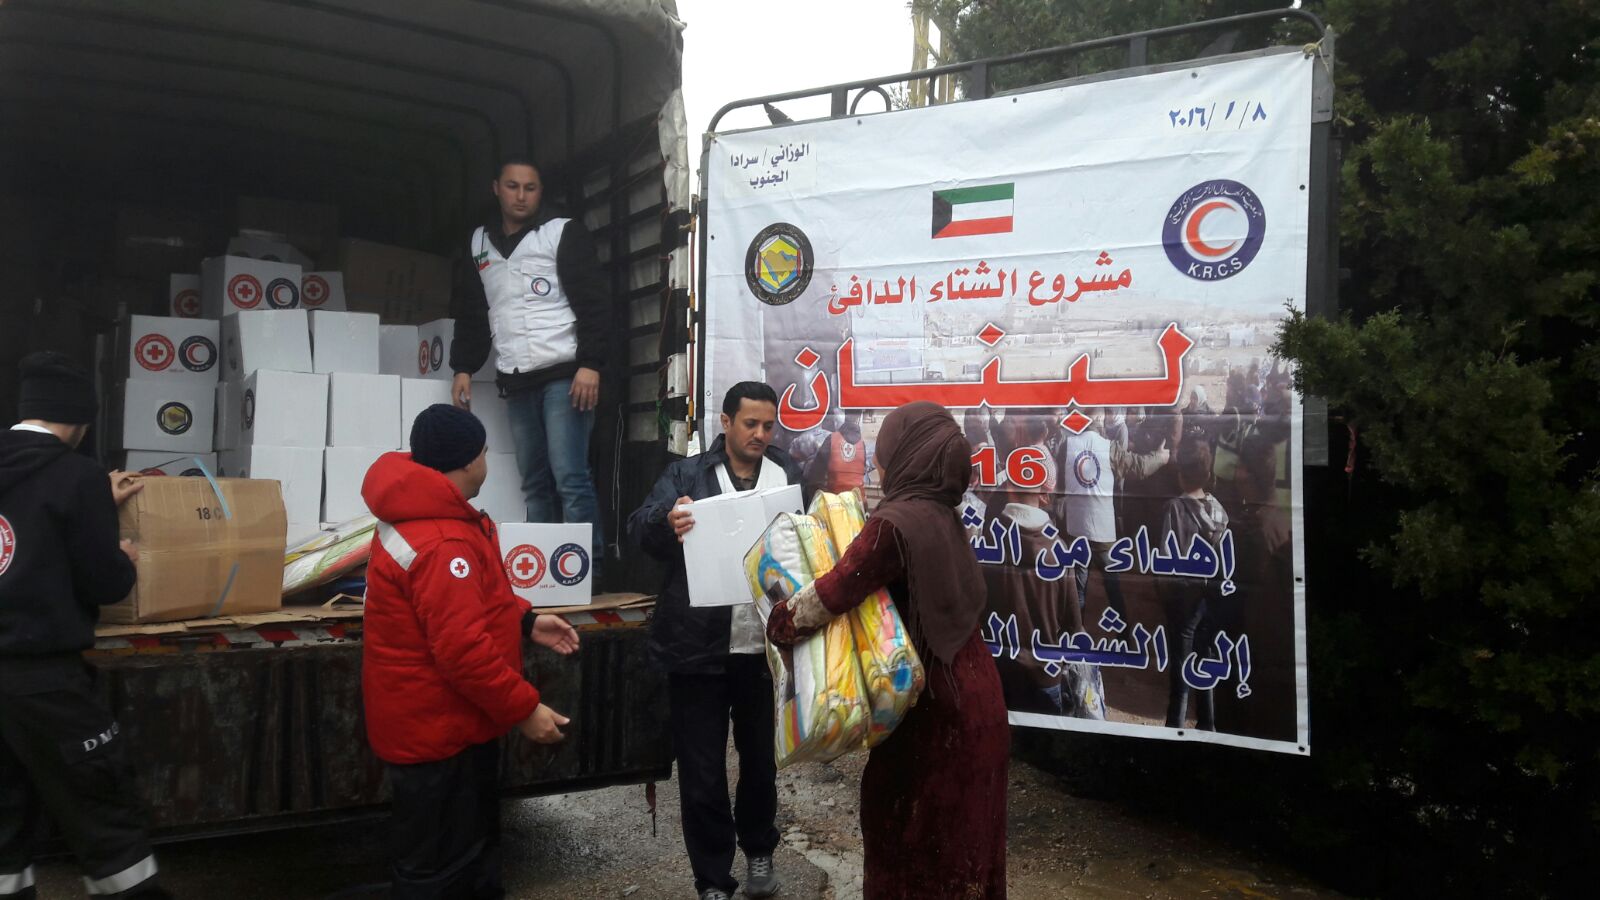 Kuwait Red Crescent Society delivers aid to refugees in south Lebanon